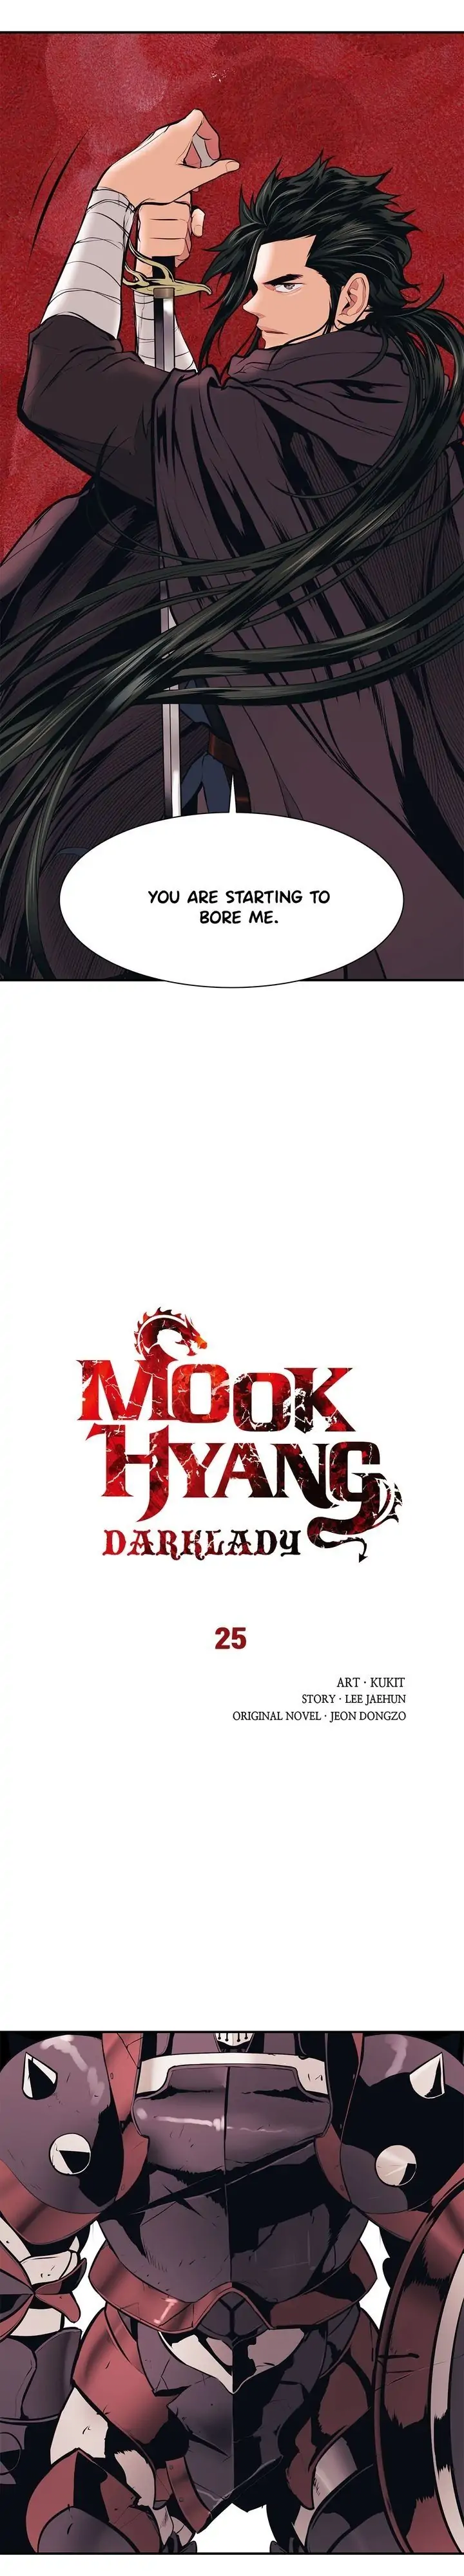 MookHyang – Dark Lady chapter 25